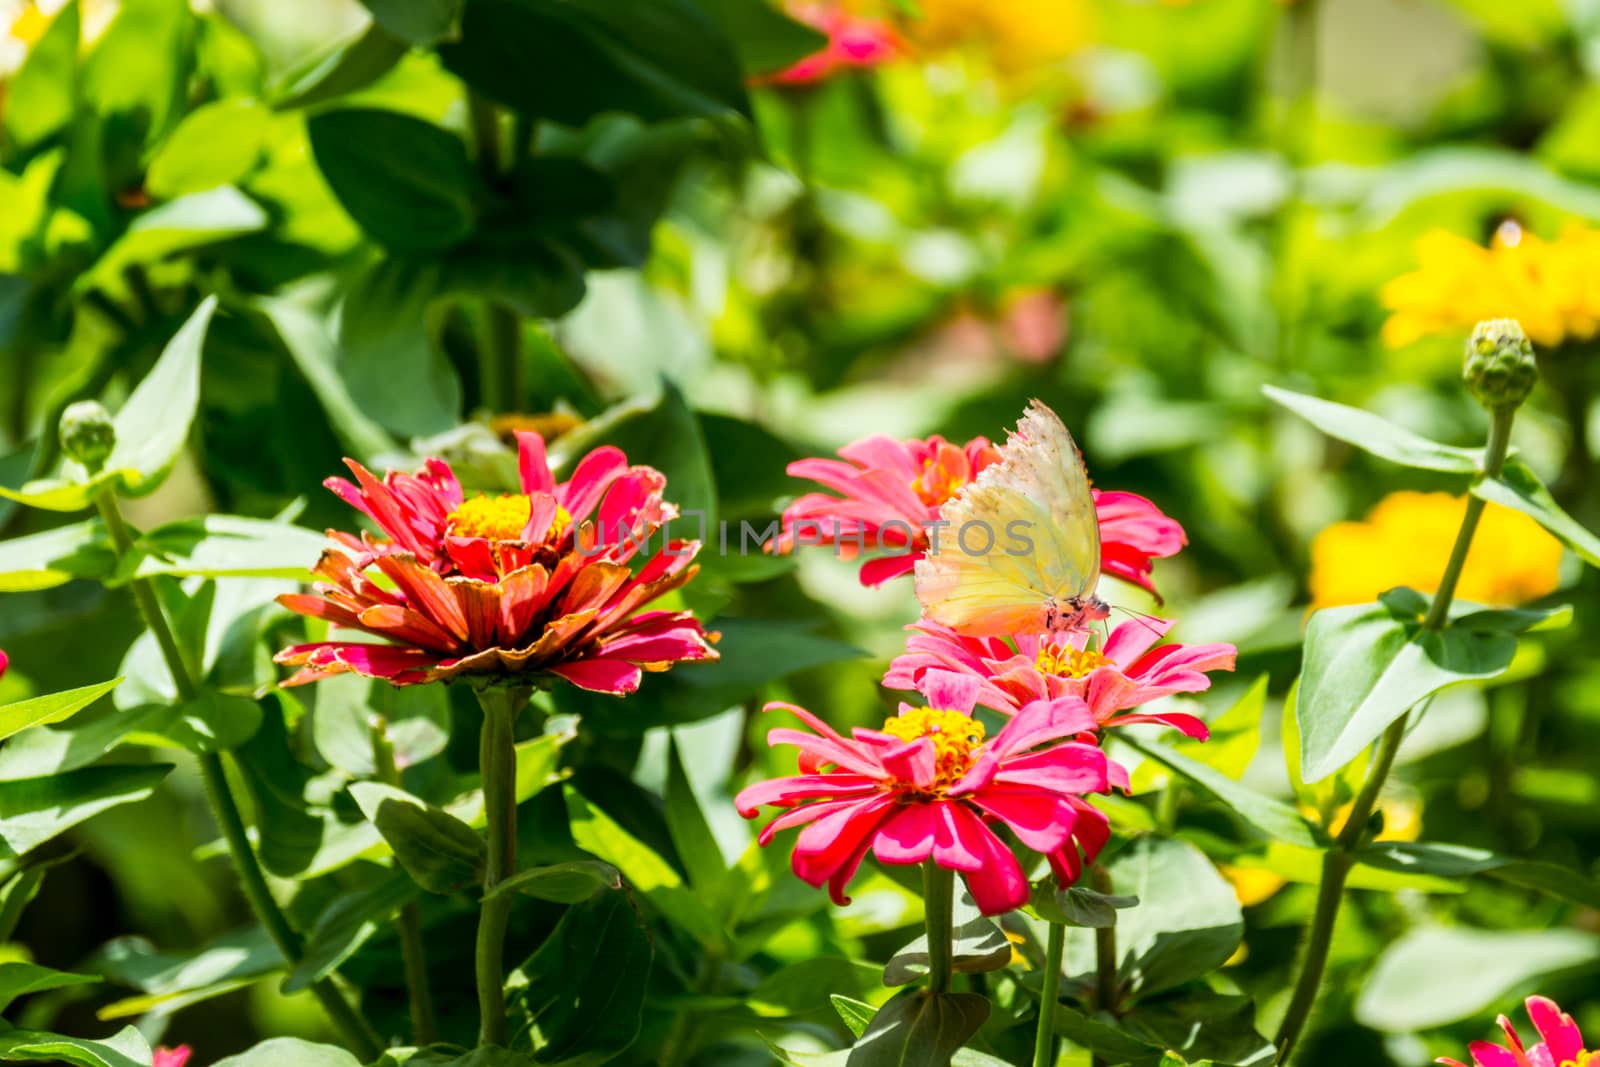 butterfly and colorful flowers at tropical garden,Chiangrai,Thailand